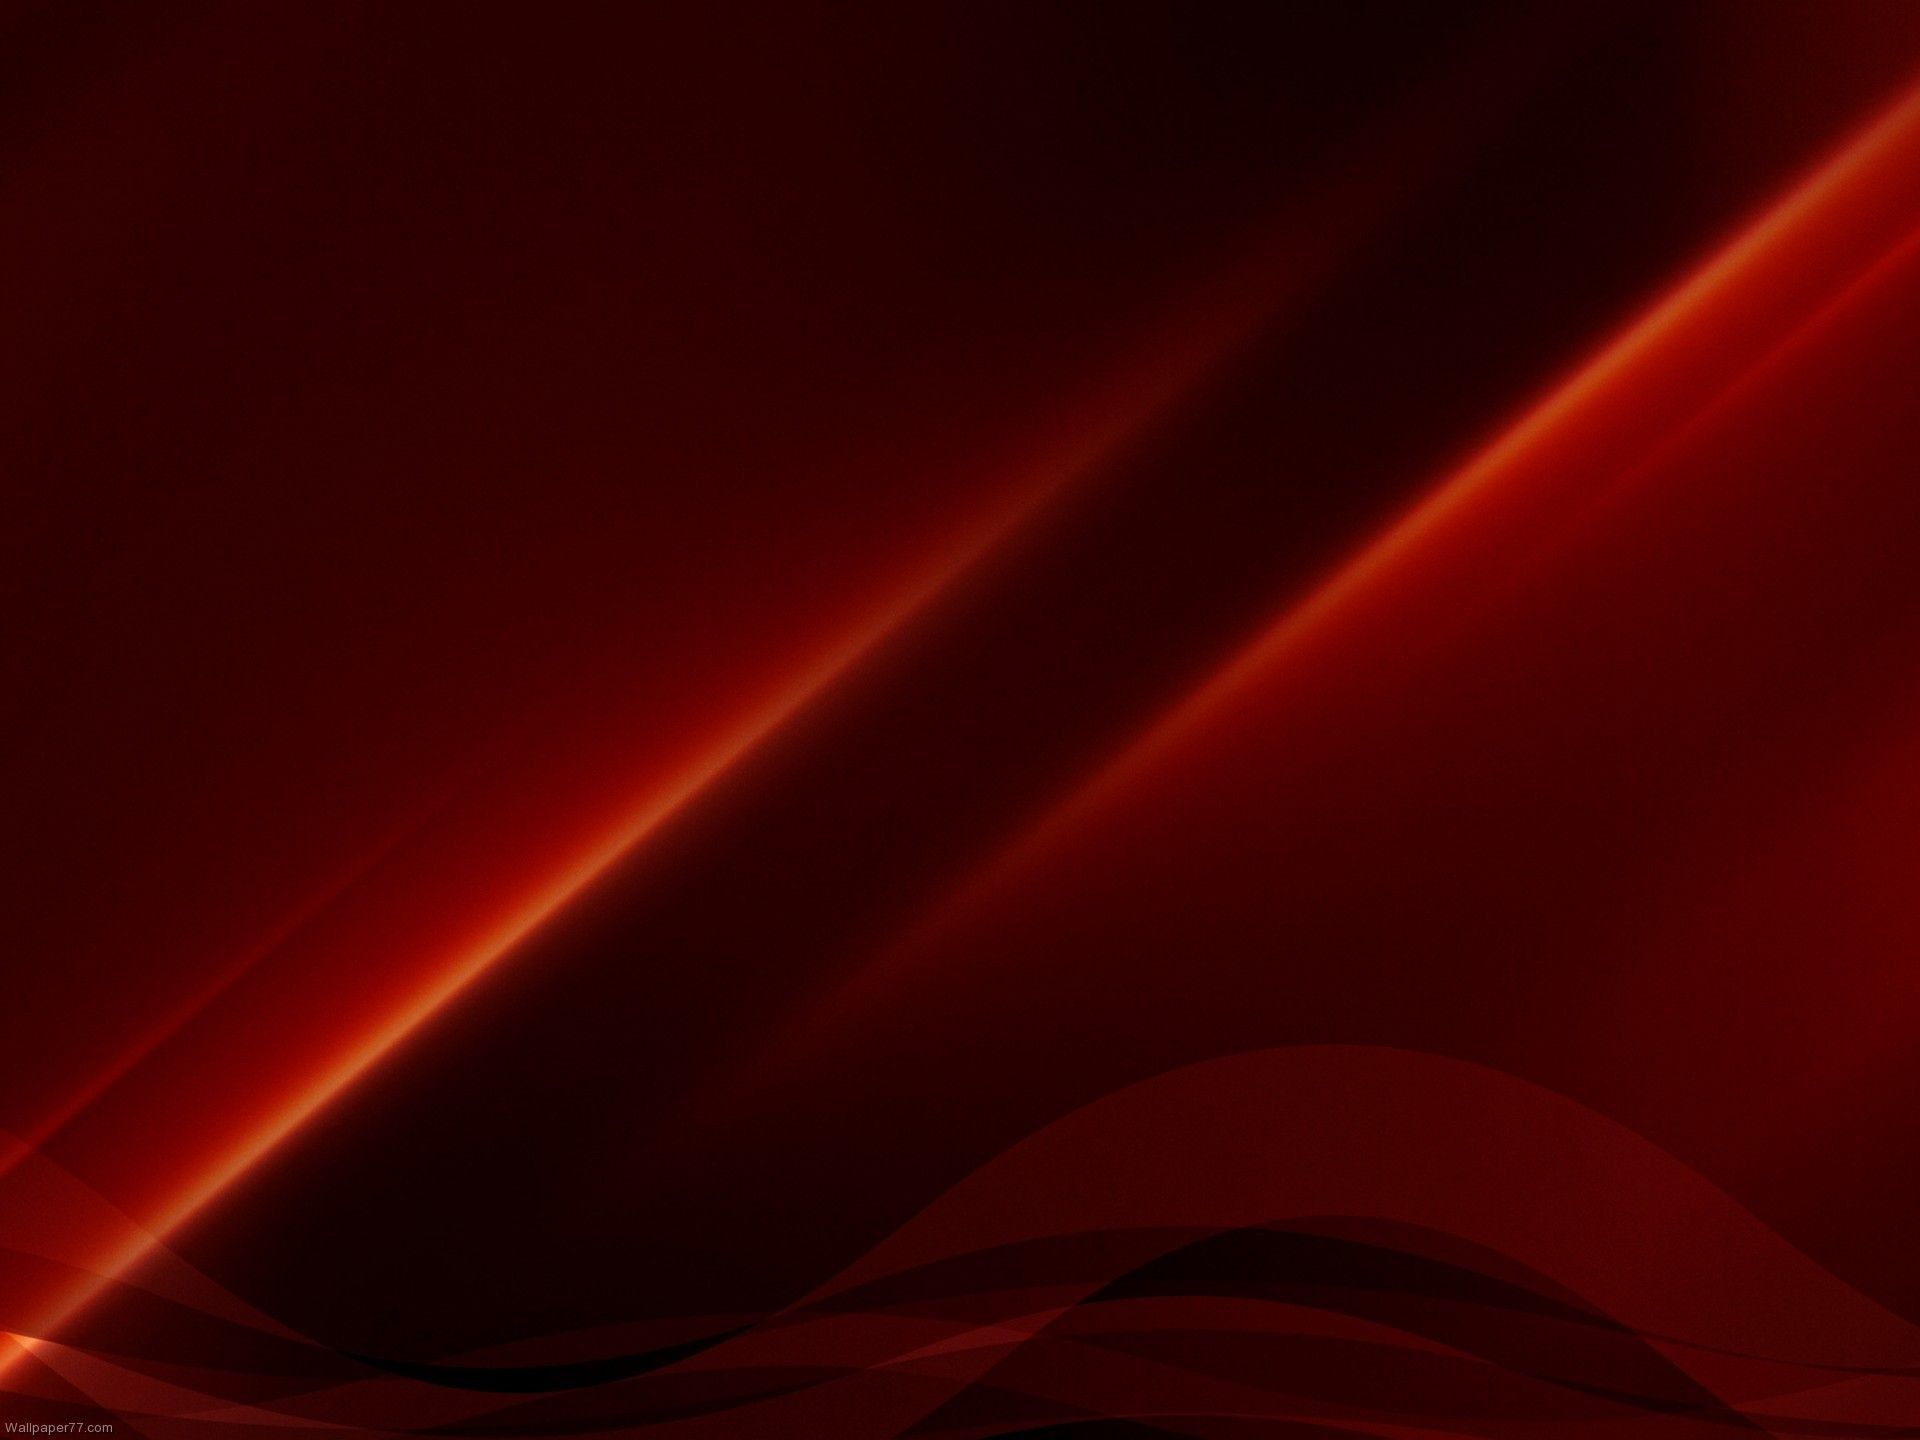 Maroon and Black Wallpapers on WallpaperDog